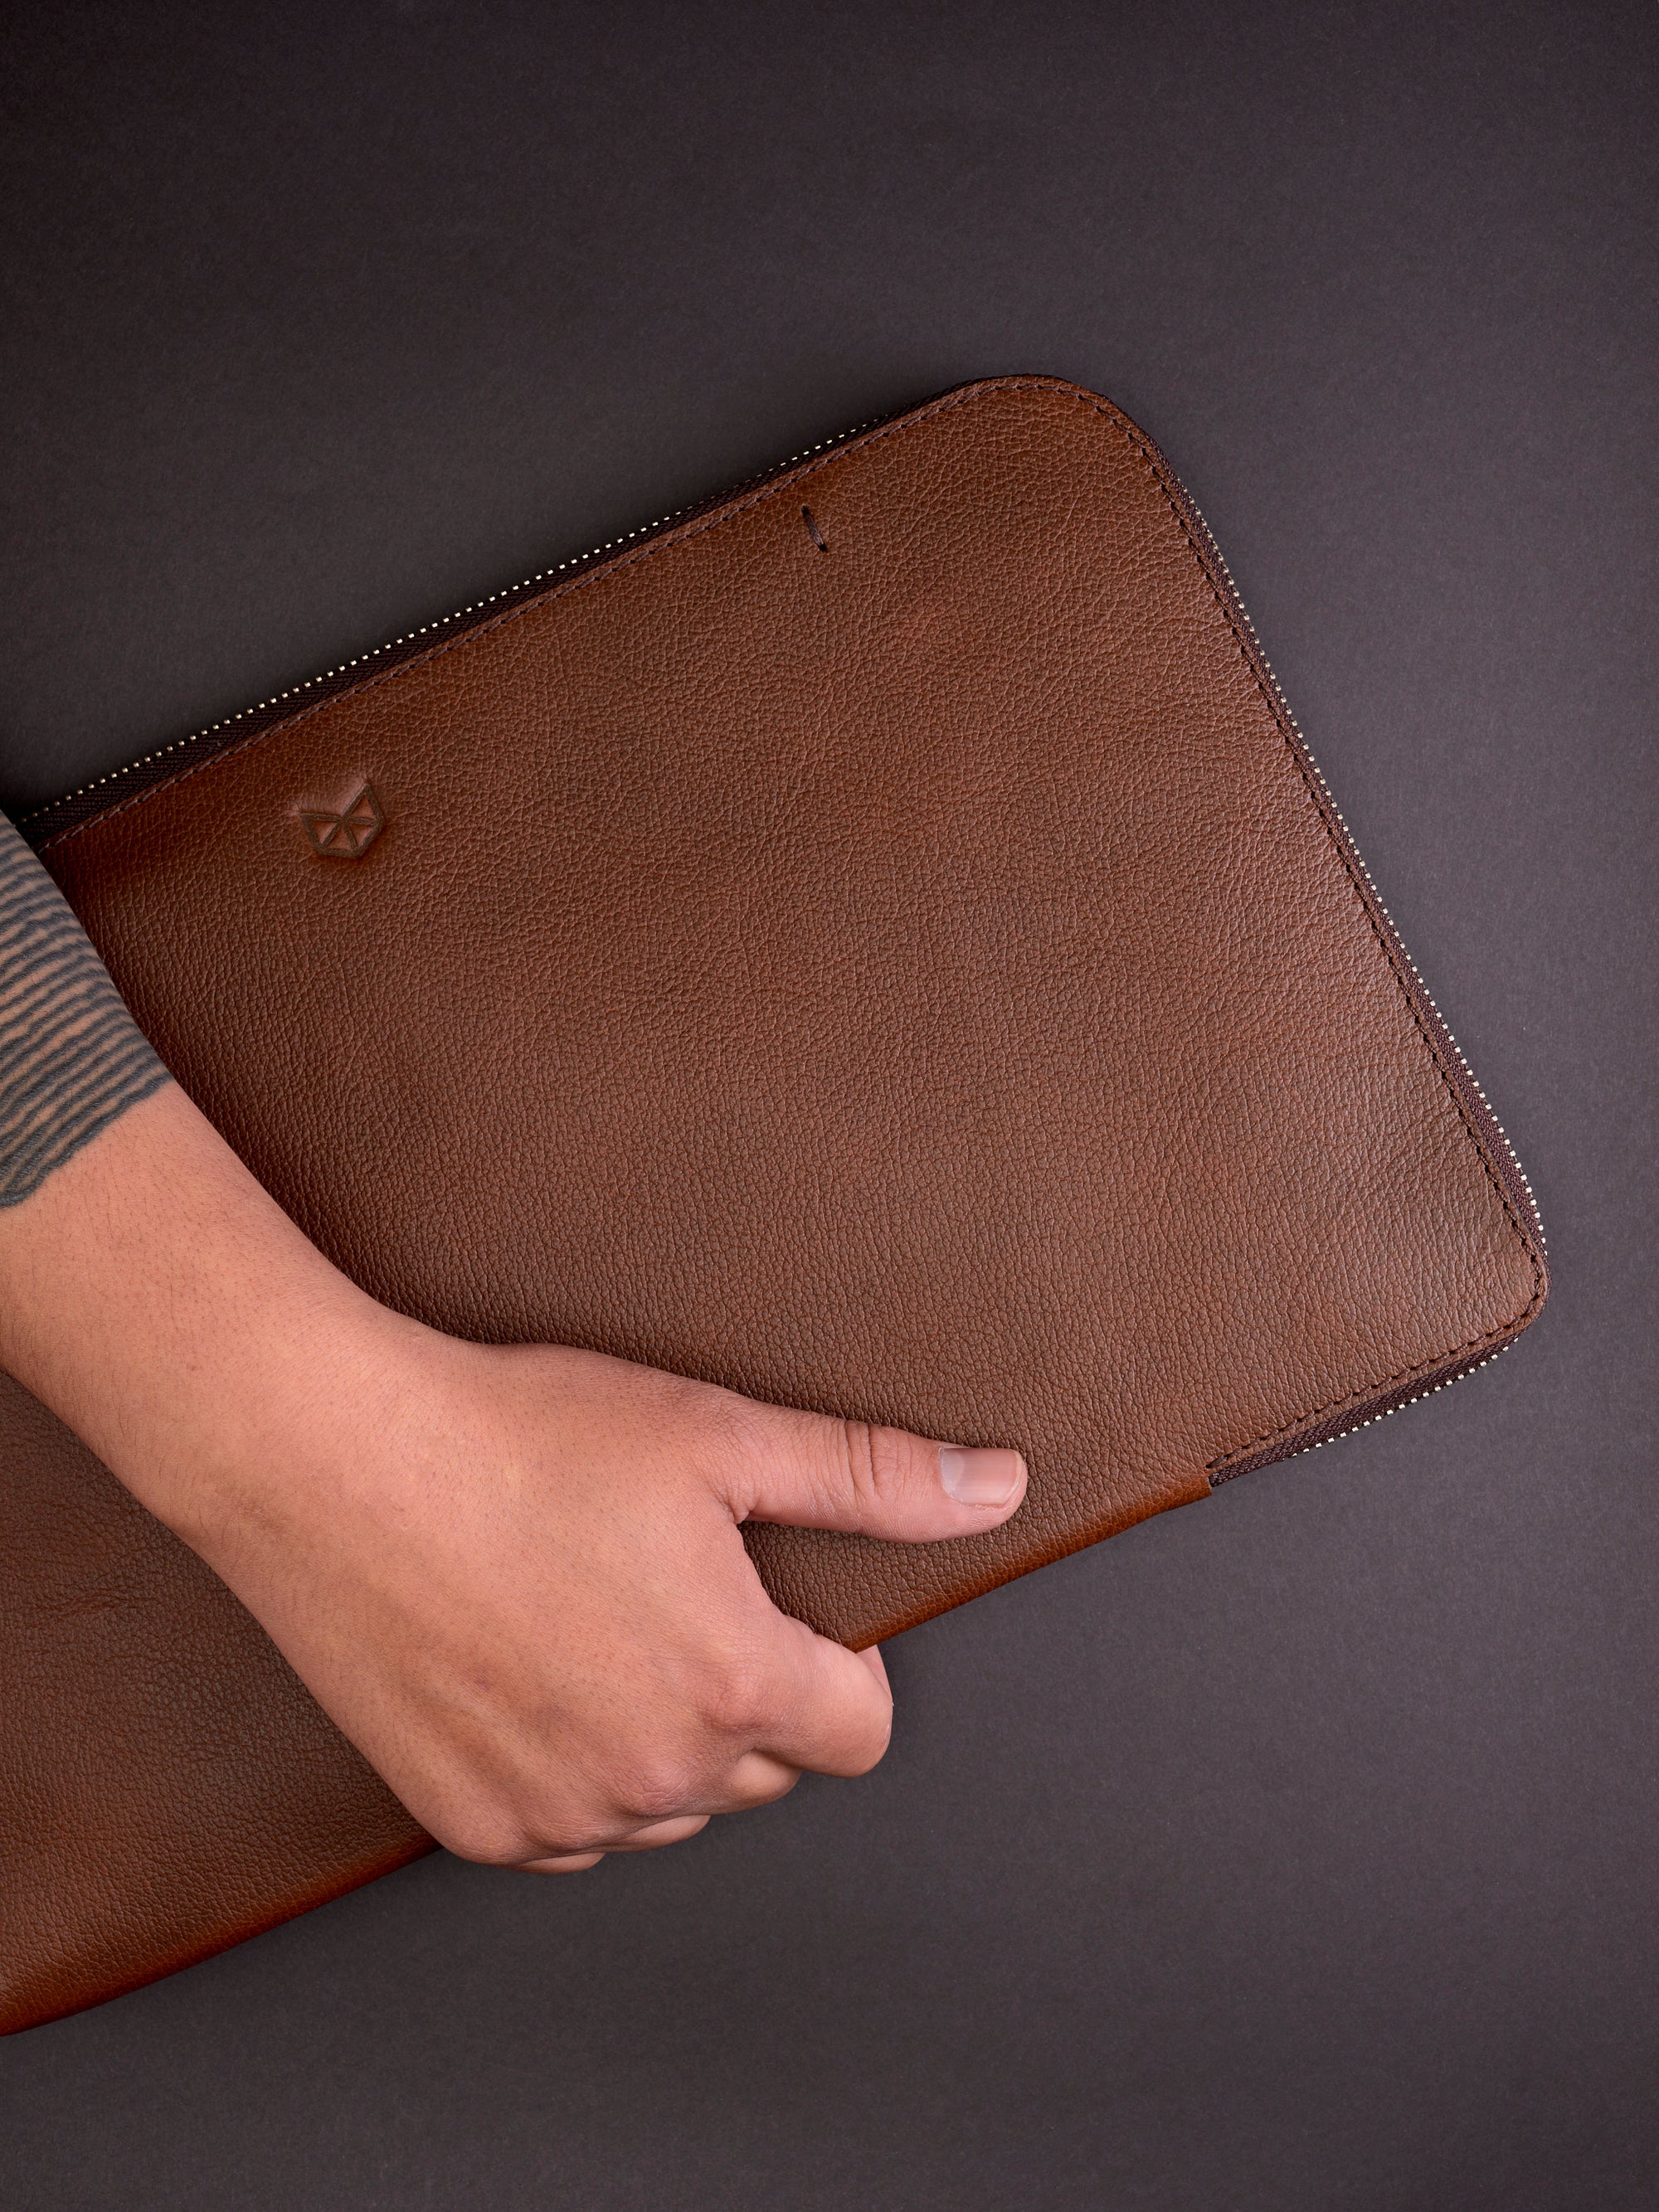 Style. Draftsman 6 iPad Case Brown, iPad Pro 11-inch, iPad Pro 12.9-inch, M1 Chip by Capra Leather